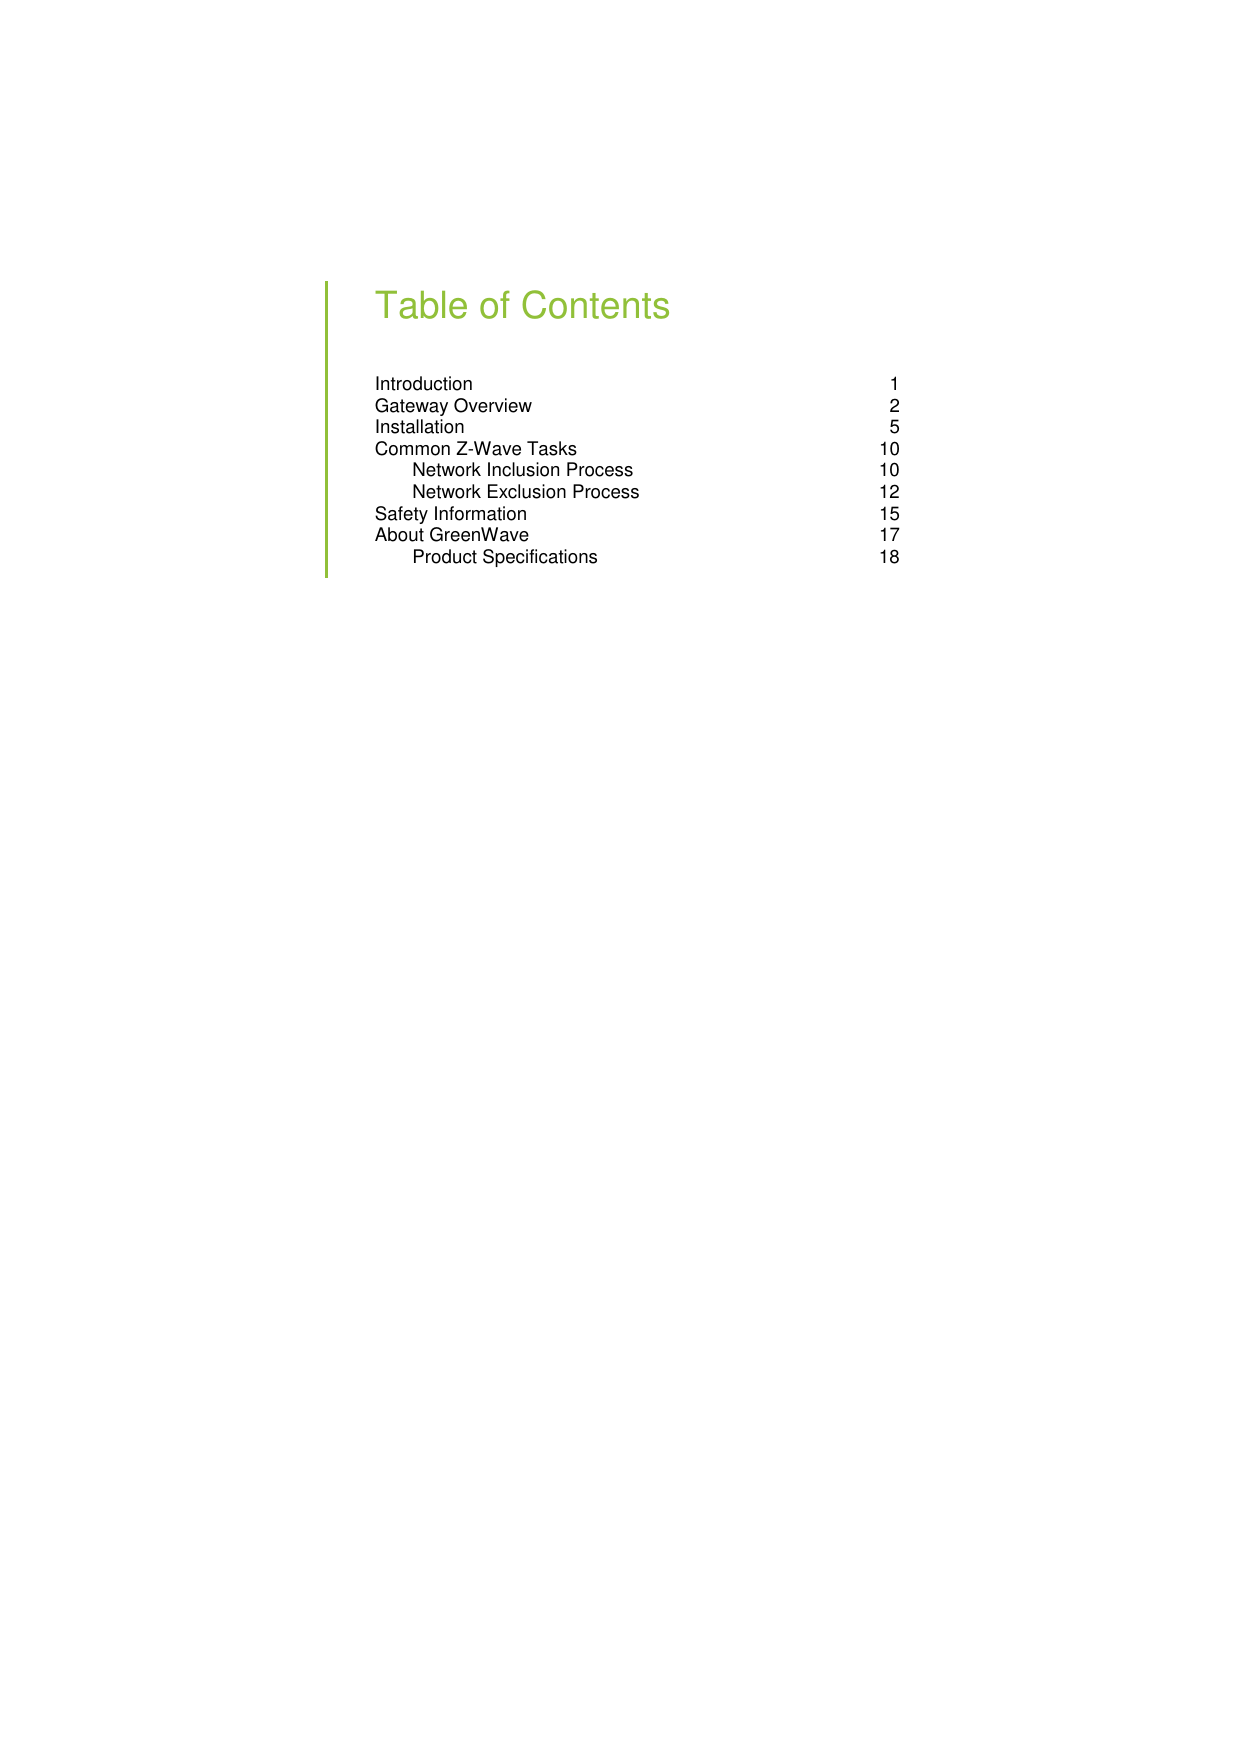   Table of Contents Introduction  1 Gateway Overview  2 Installation  5 Common Z-Wave Tasks  10 Network Inclusion Process  10 Network Exclusion Process  12 Safety Information  15 About GreenWave  17 Product Specifications  18  